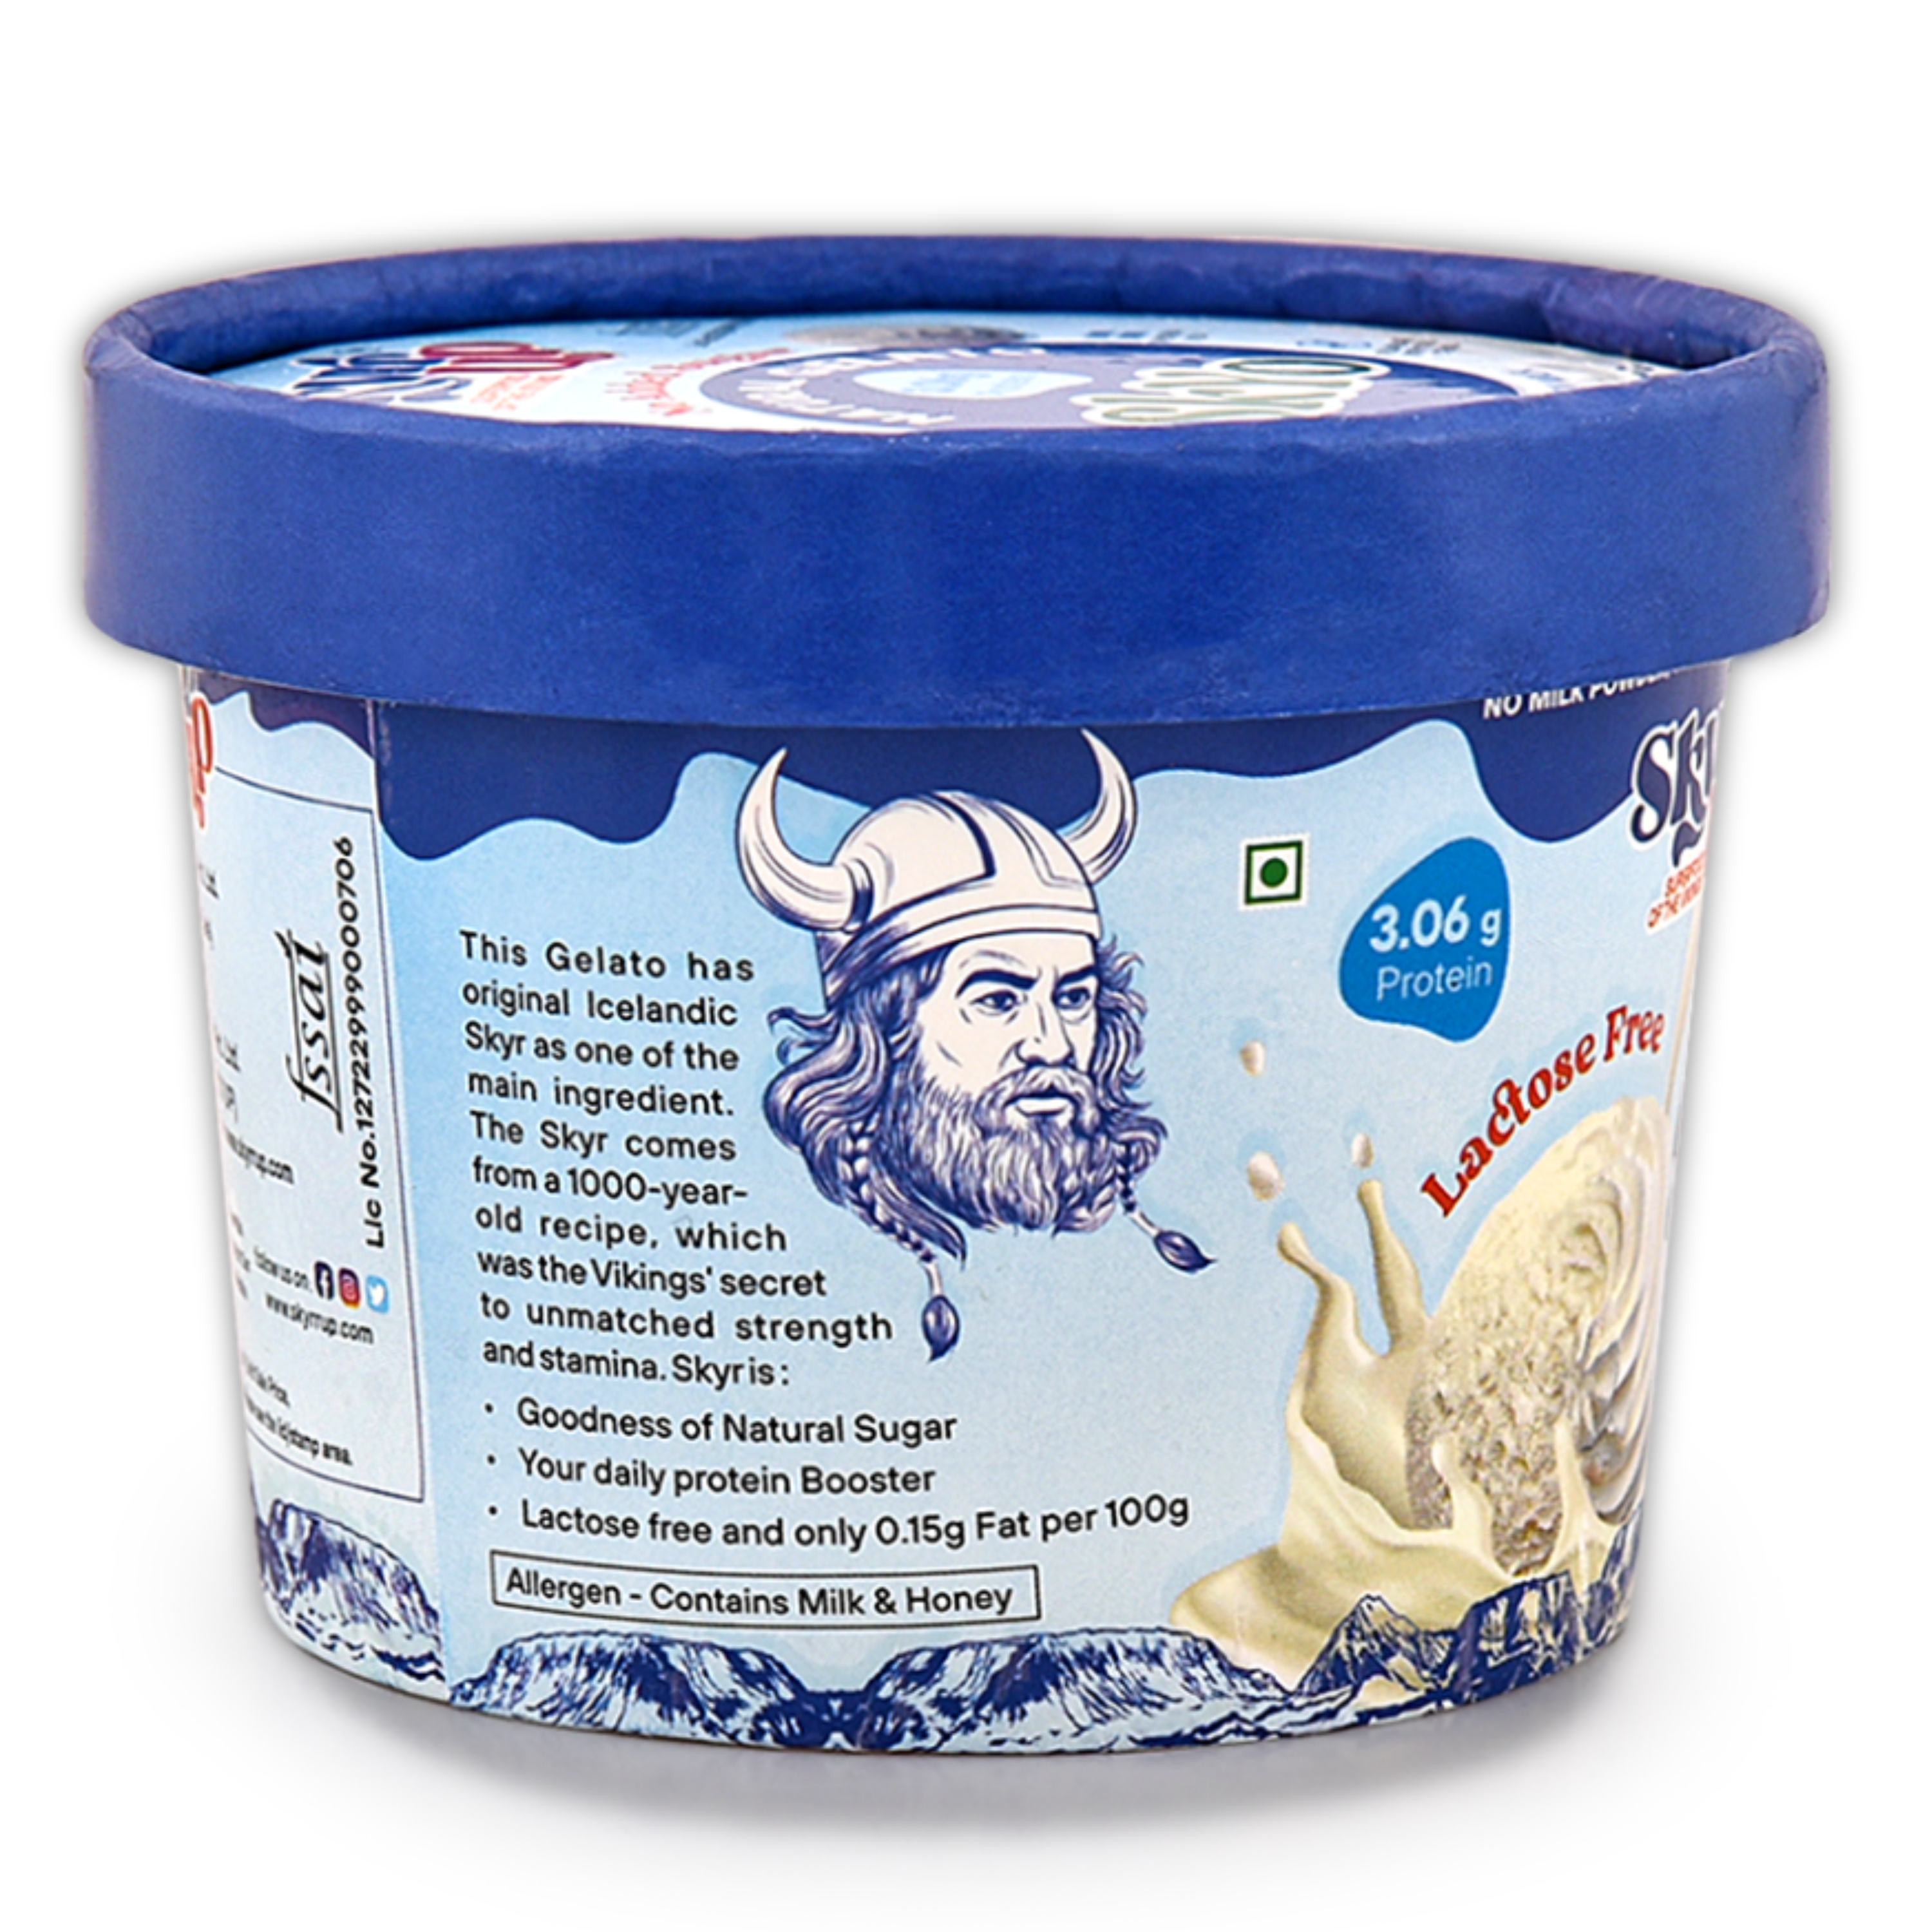 Natural Gelato( (Made From A2 Milk) - Gelato 100g Nutritional Value, No added Sugar, Lactose Free, Calcium Rich, Made With Skyr/Greek Yogurt, Protein Rich, Vegan Base With 100% Stevia